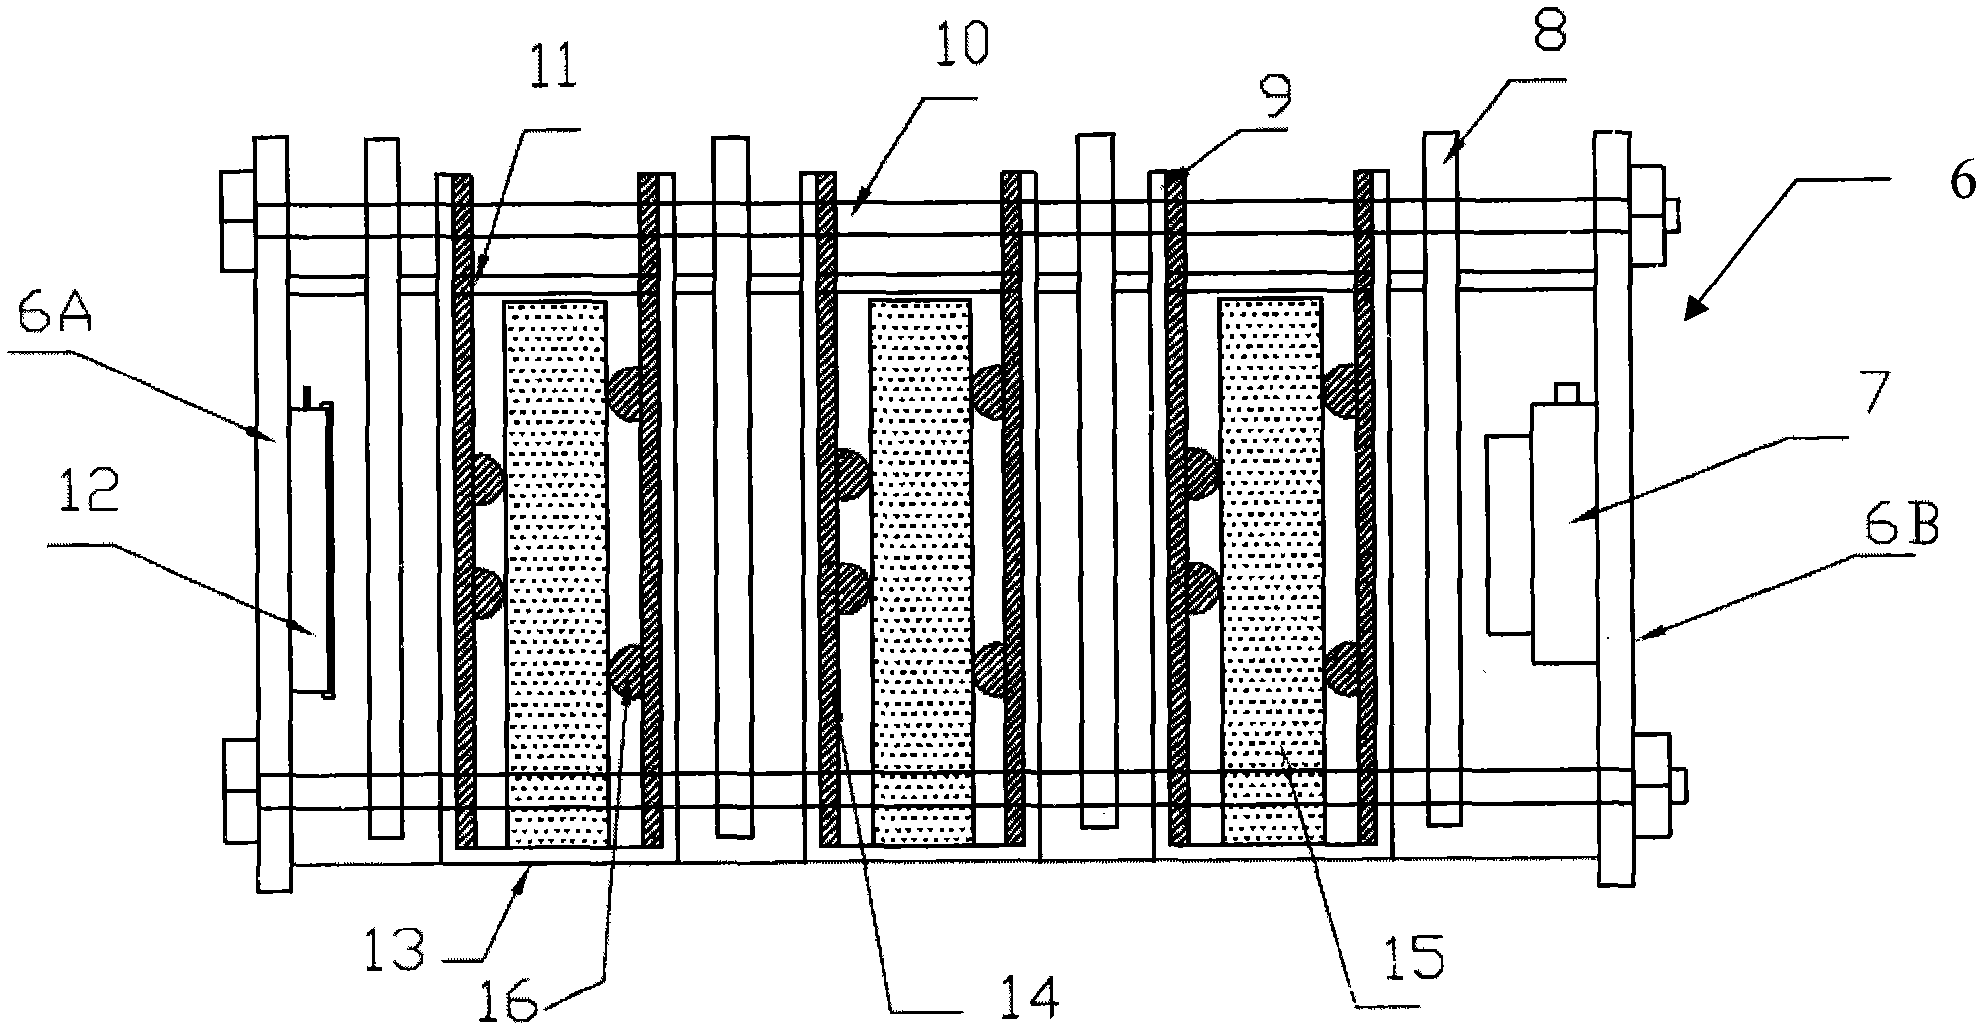 Fatigue loading device for reinforced concrete duration test